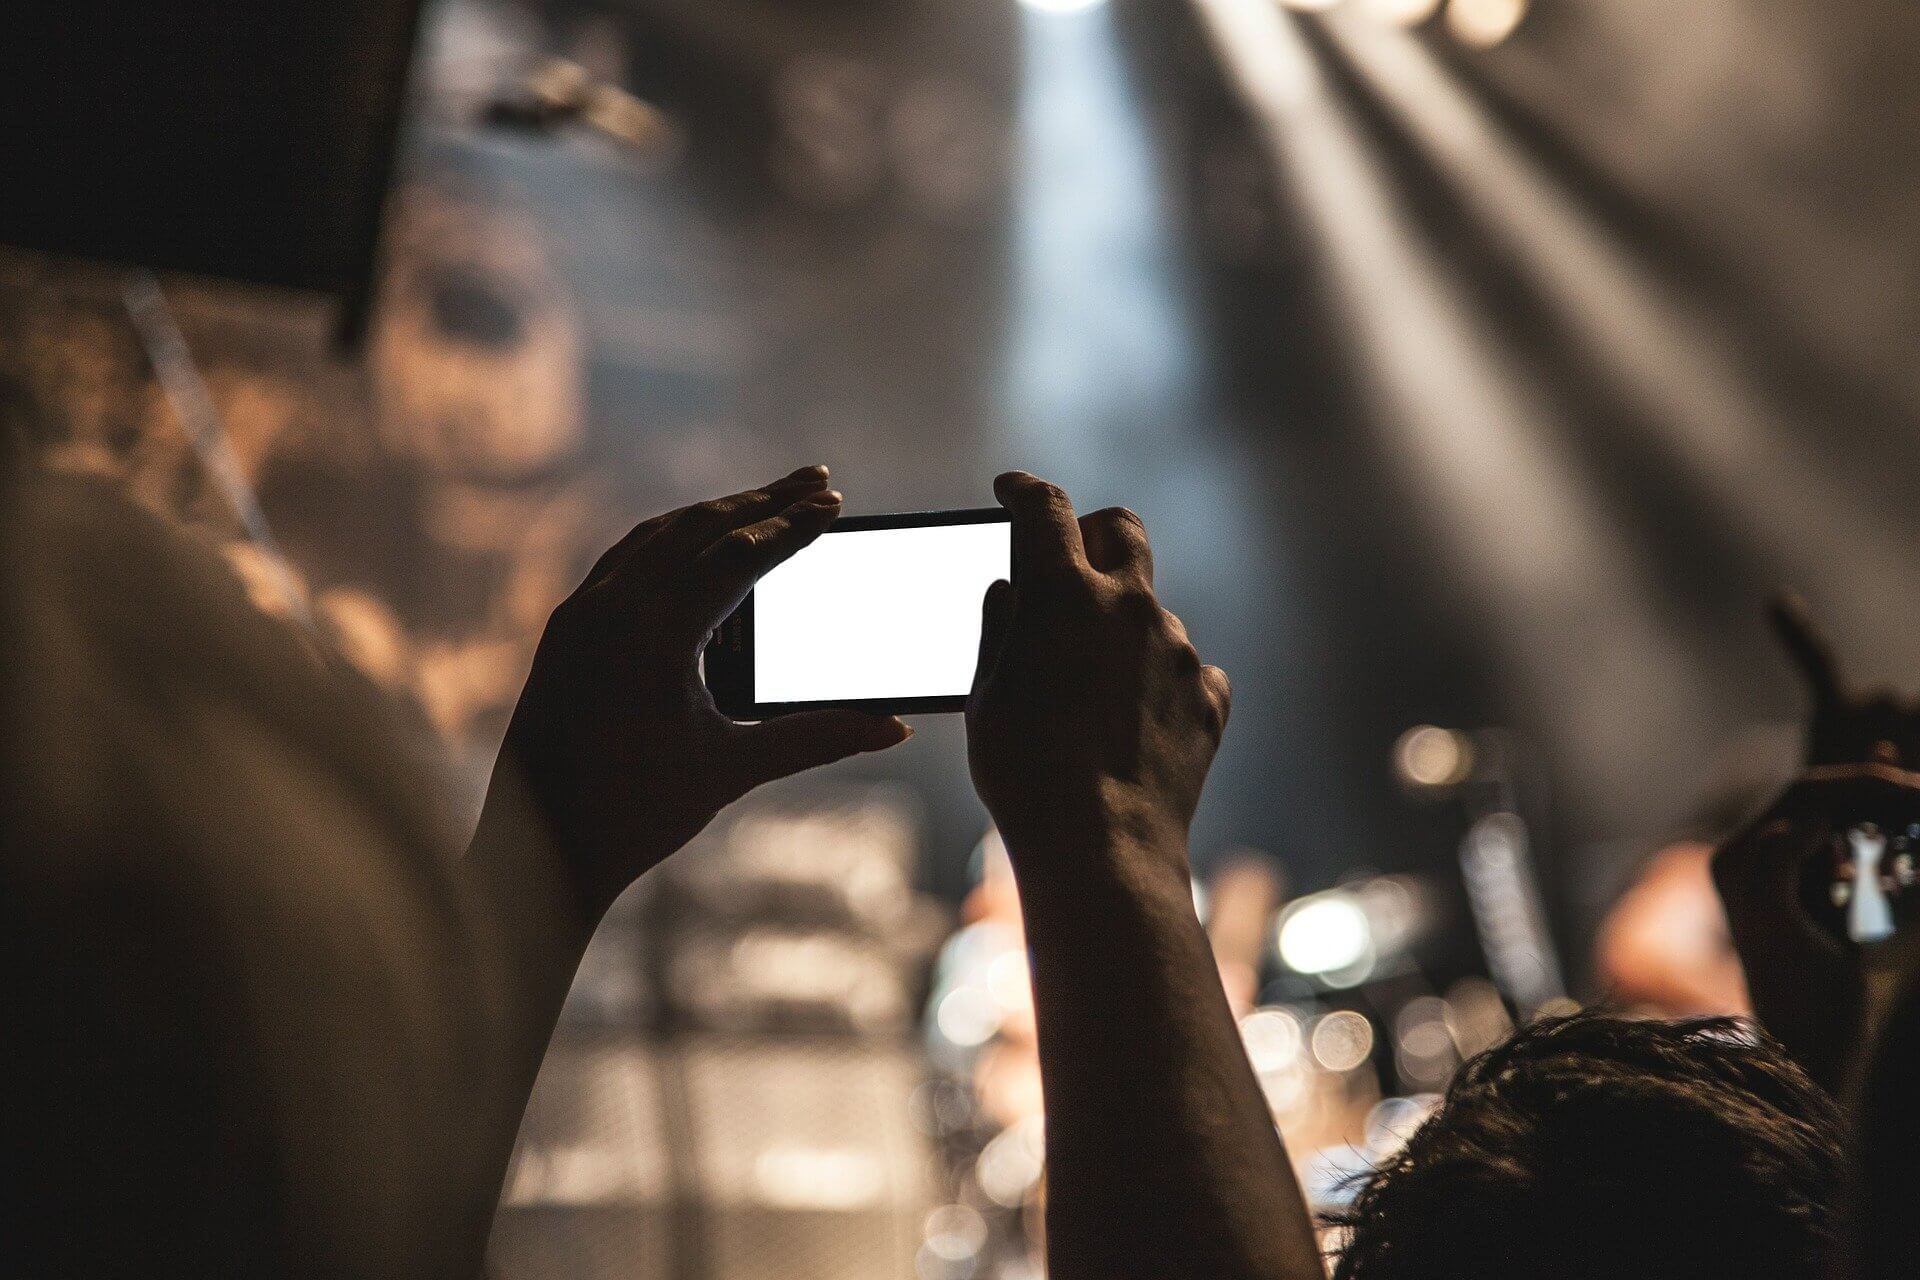 Hands holding a smartphone, recording an event